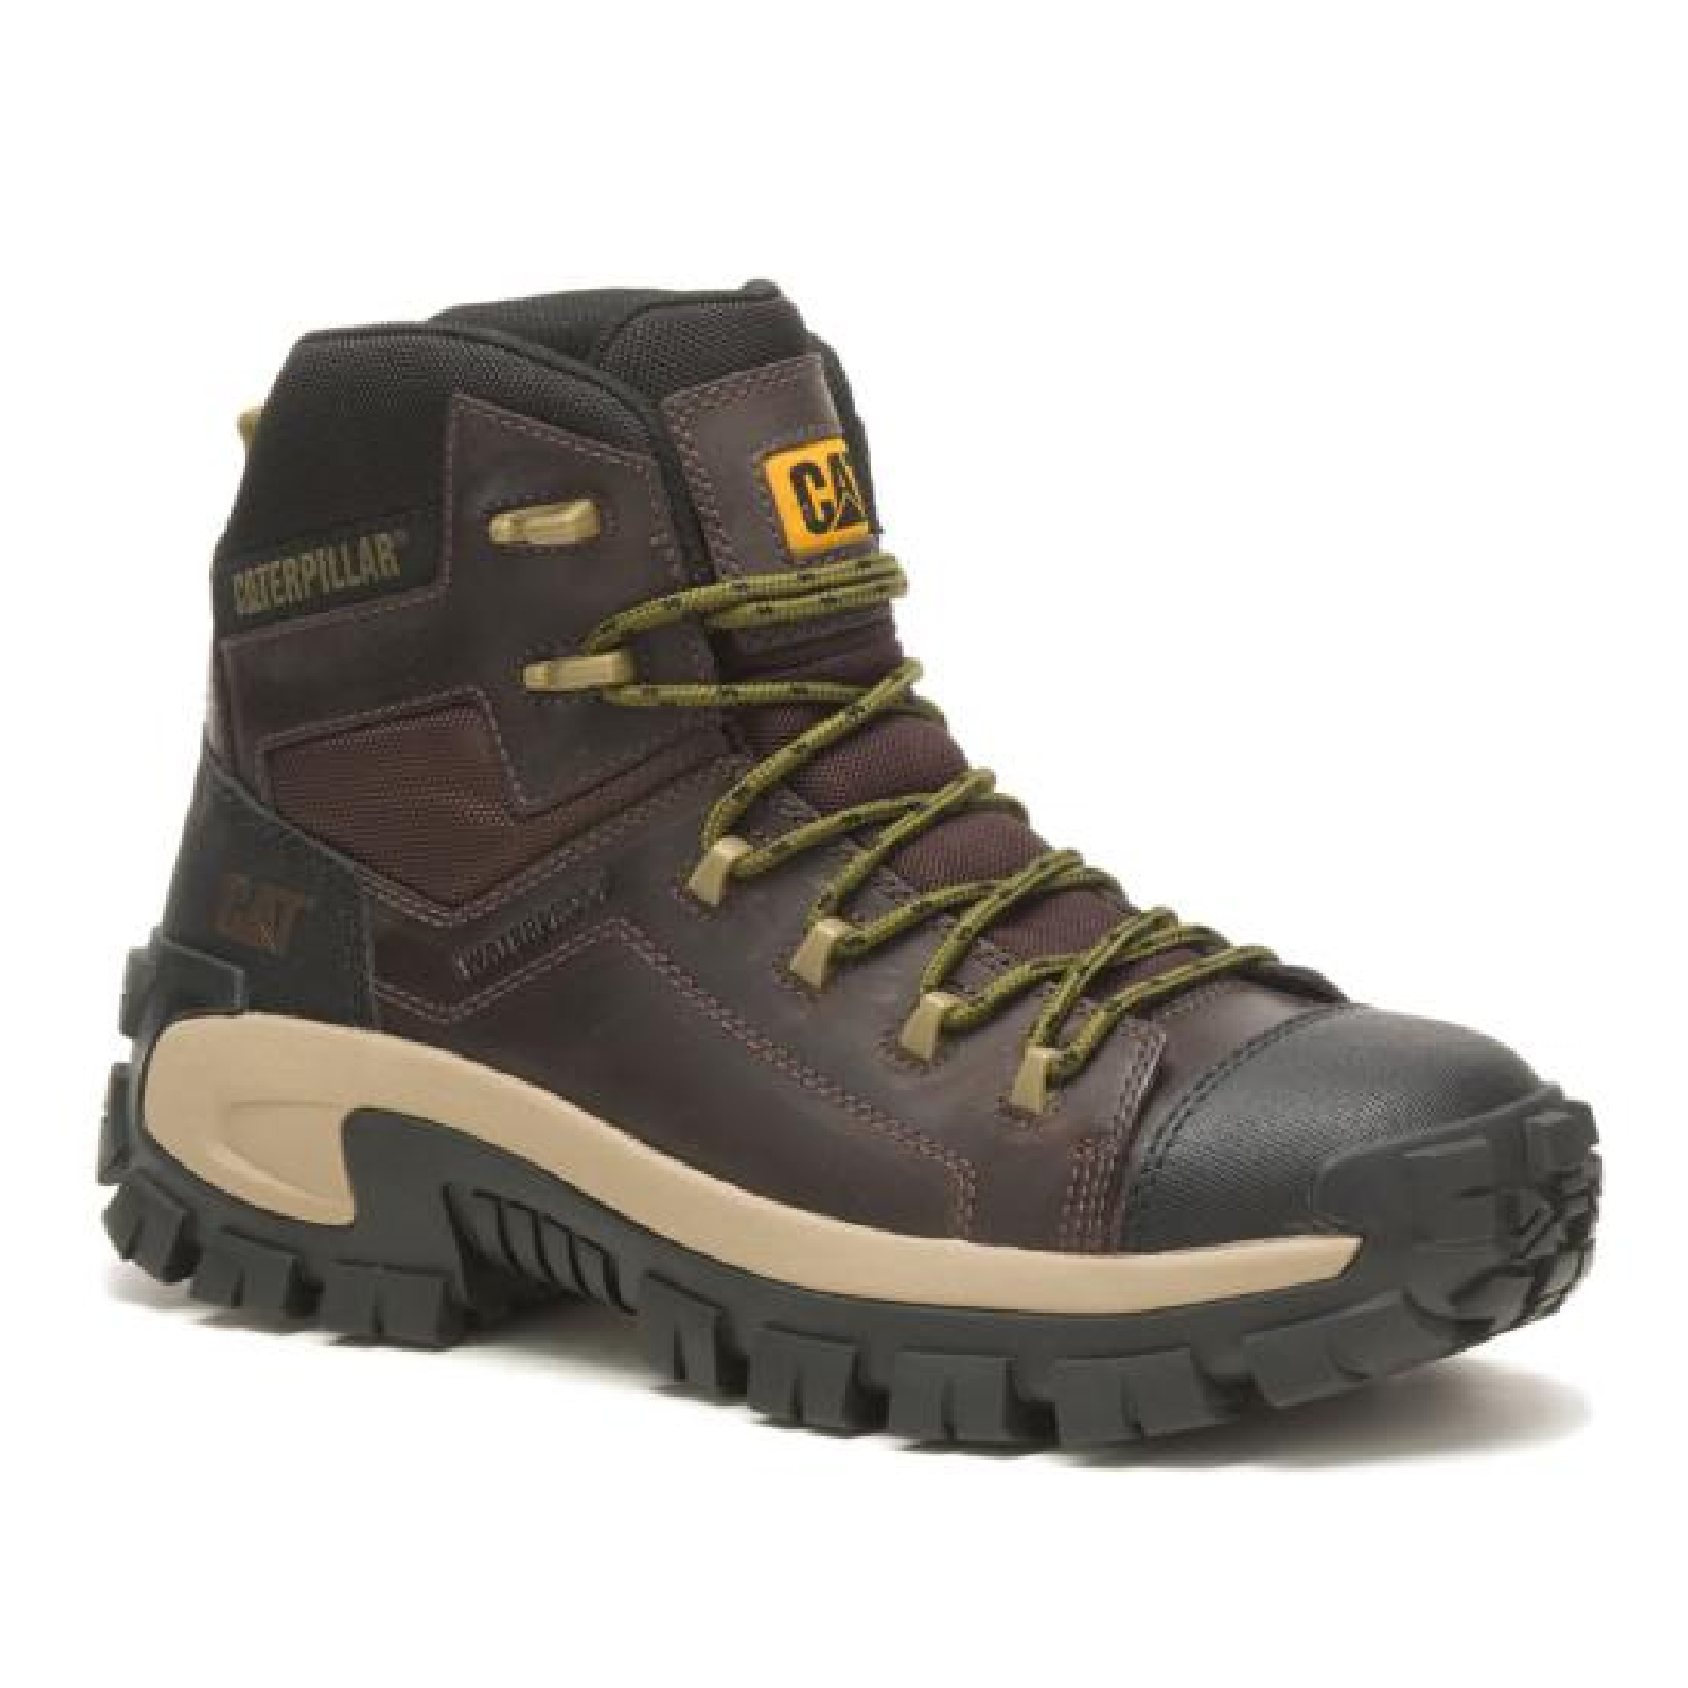 Caterpillar INVADER HIKER Composite Toe Safety Boots BROWN P91541